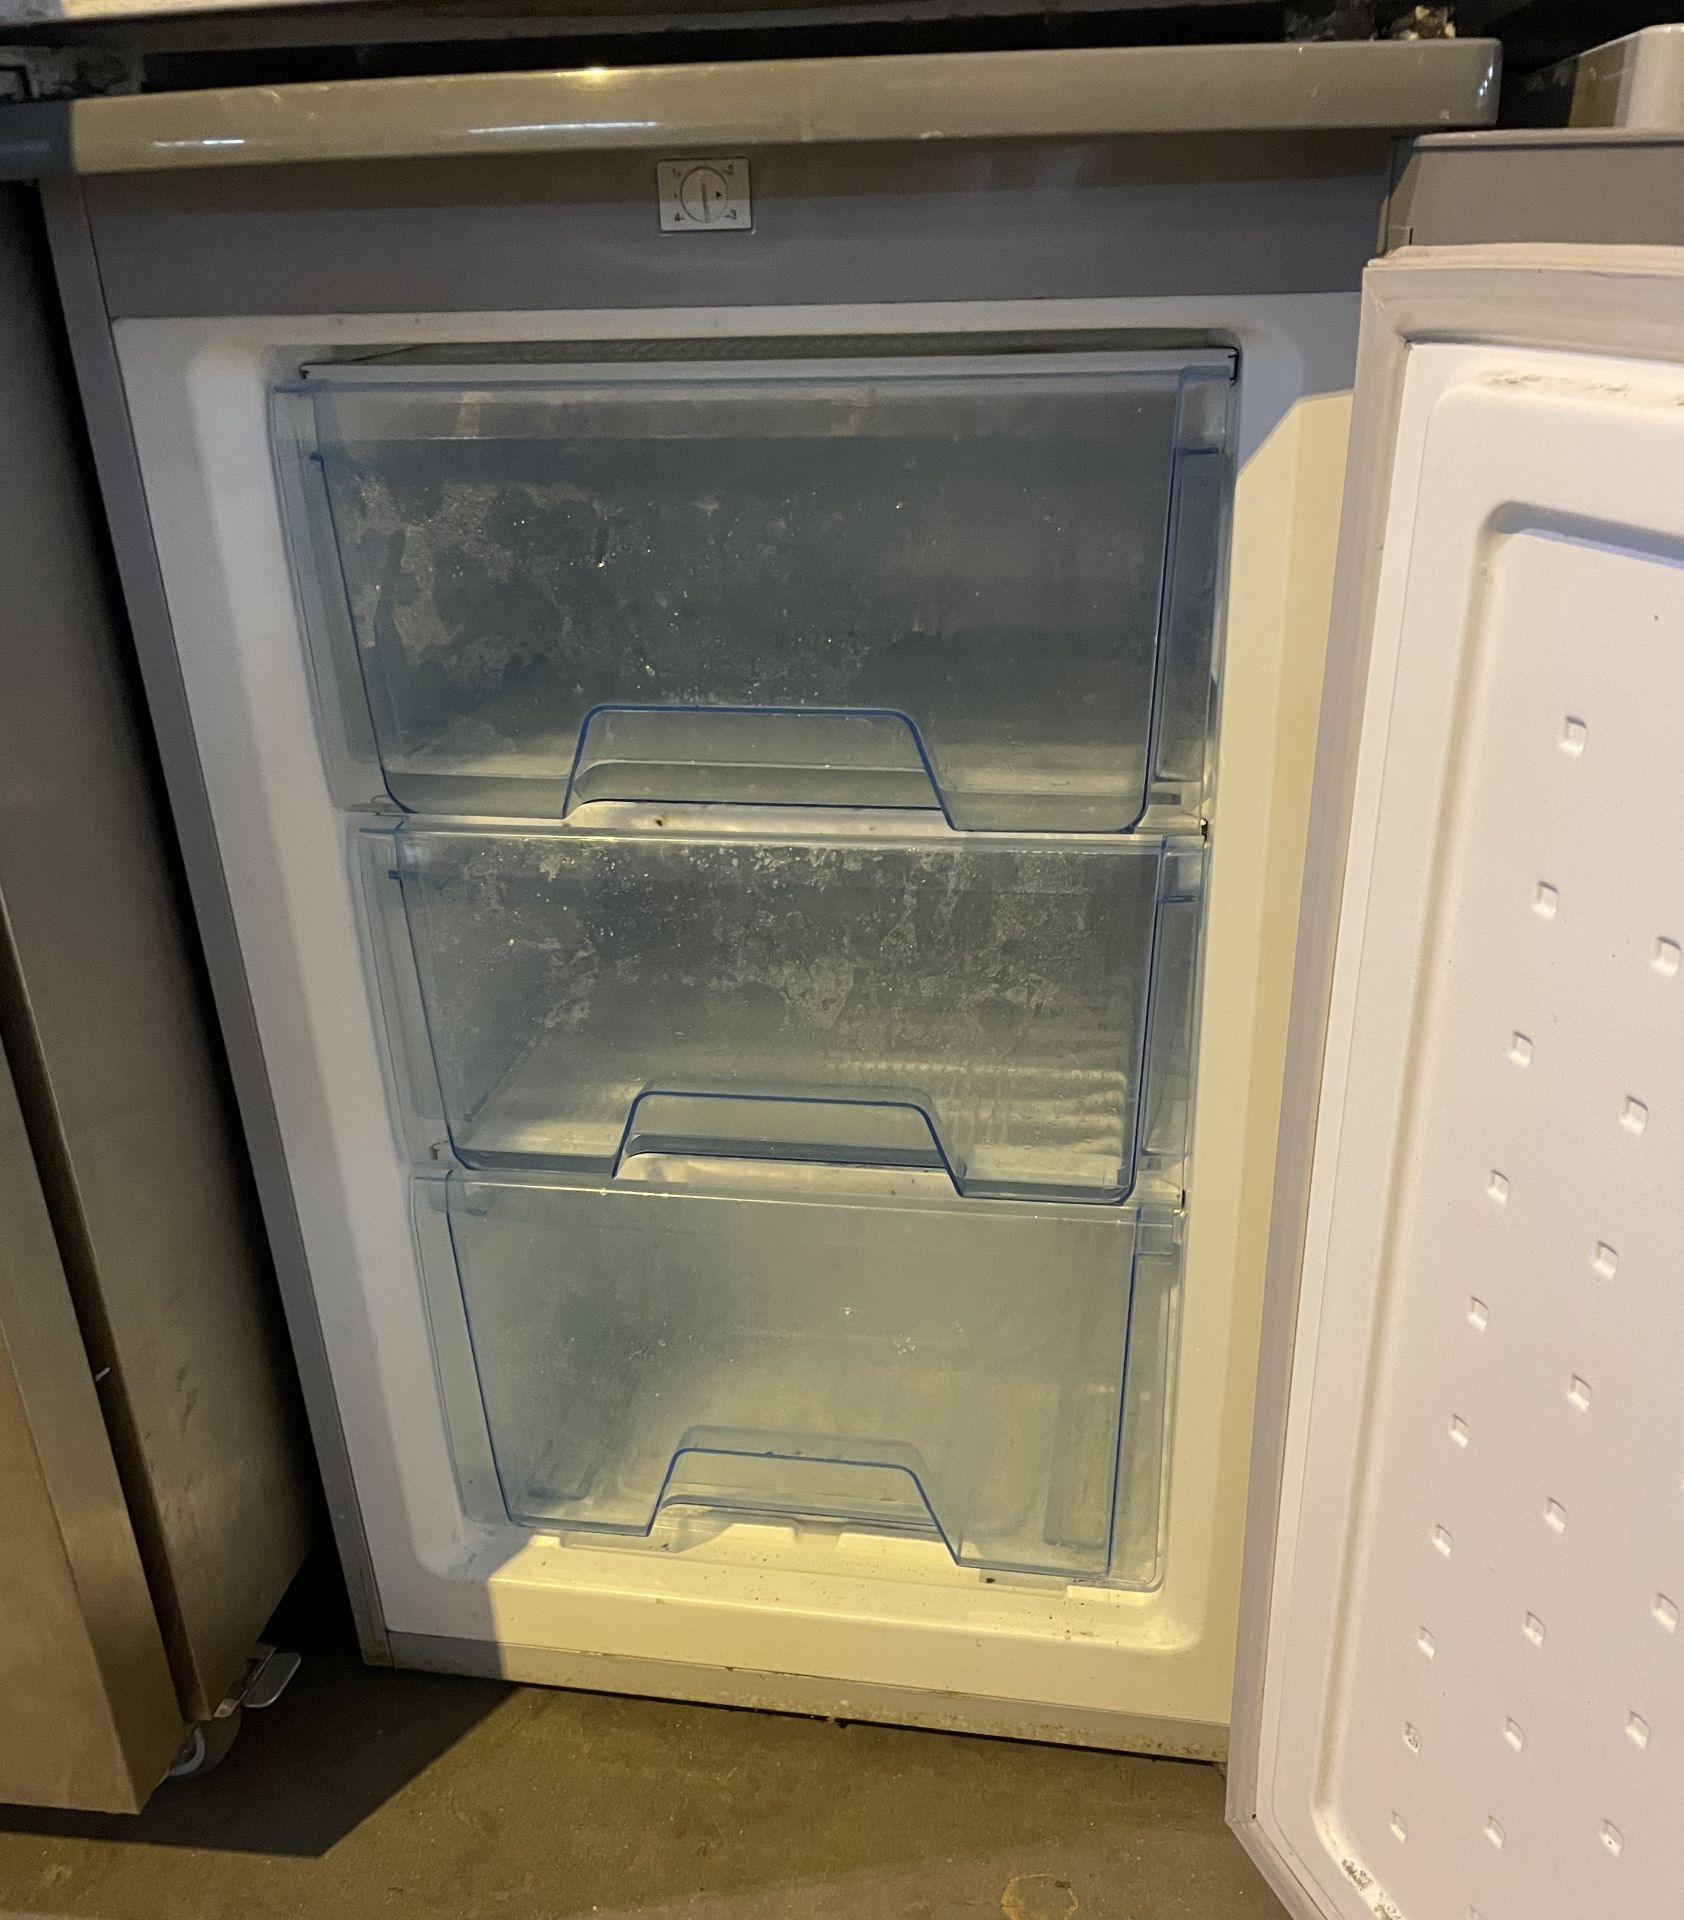 1 x Logik Undercounter Freezer With Three Drawers And Silver Finish - Image 3 of 3